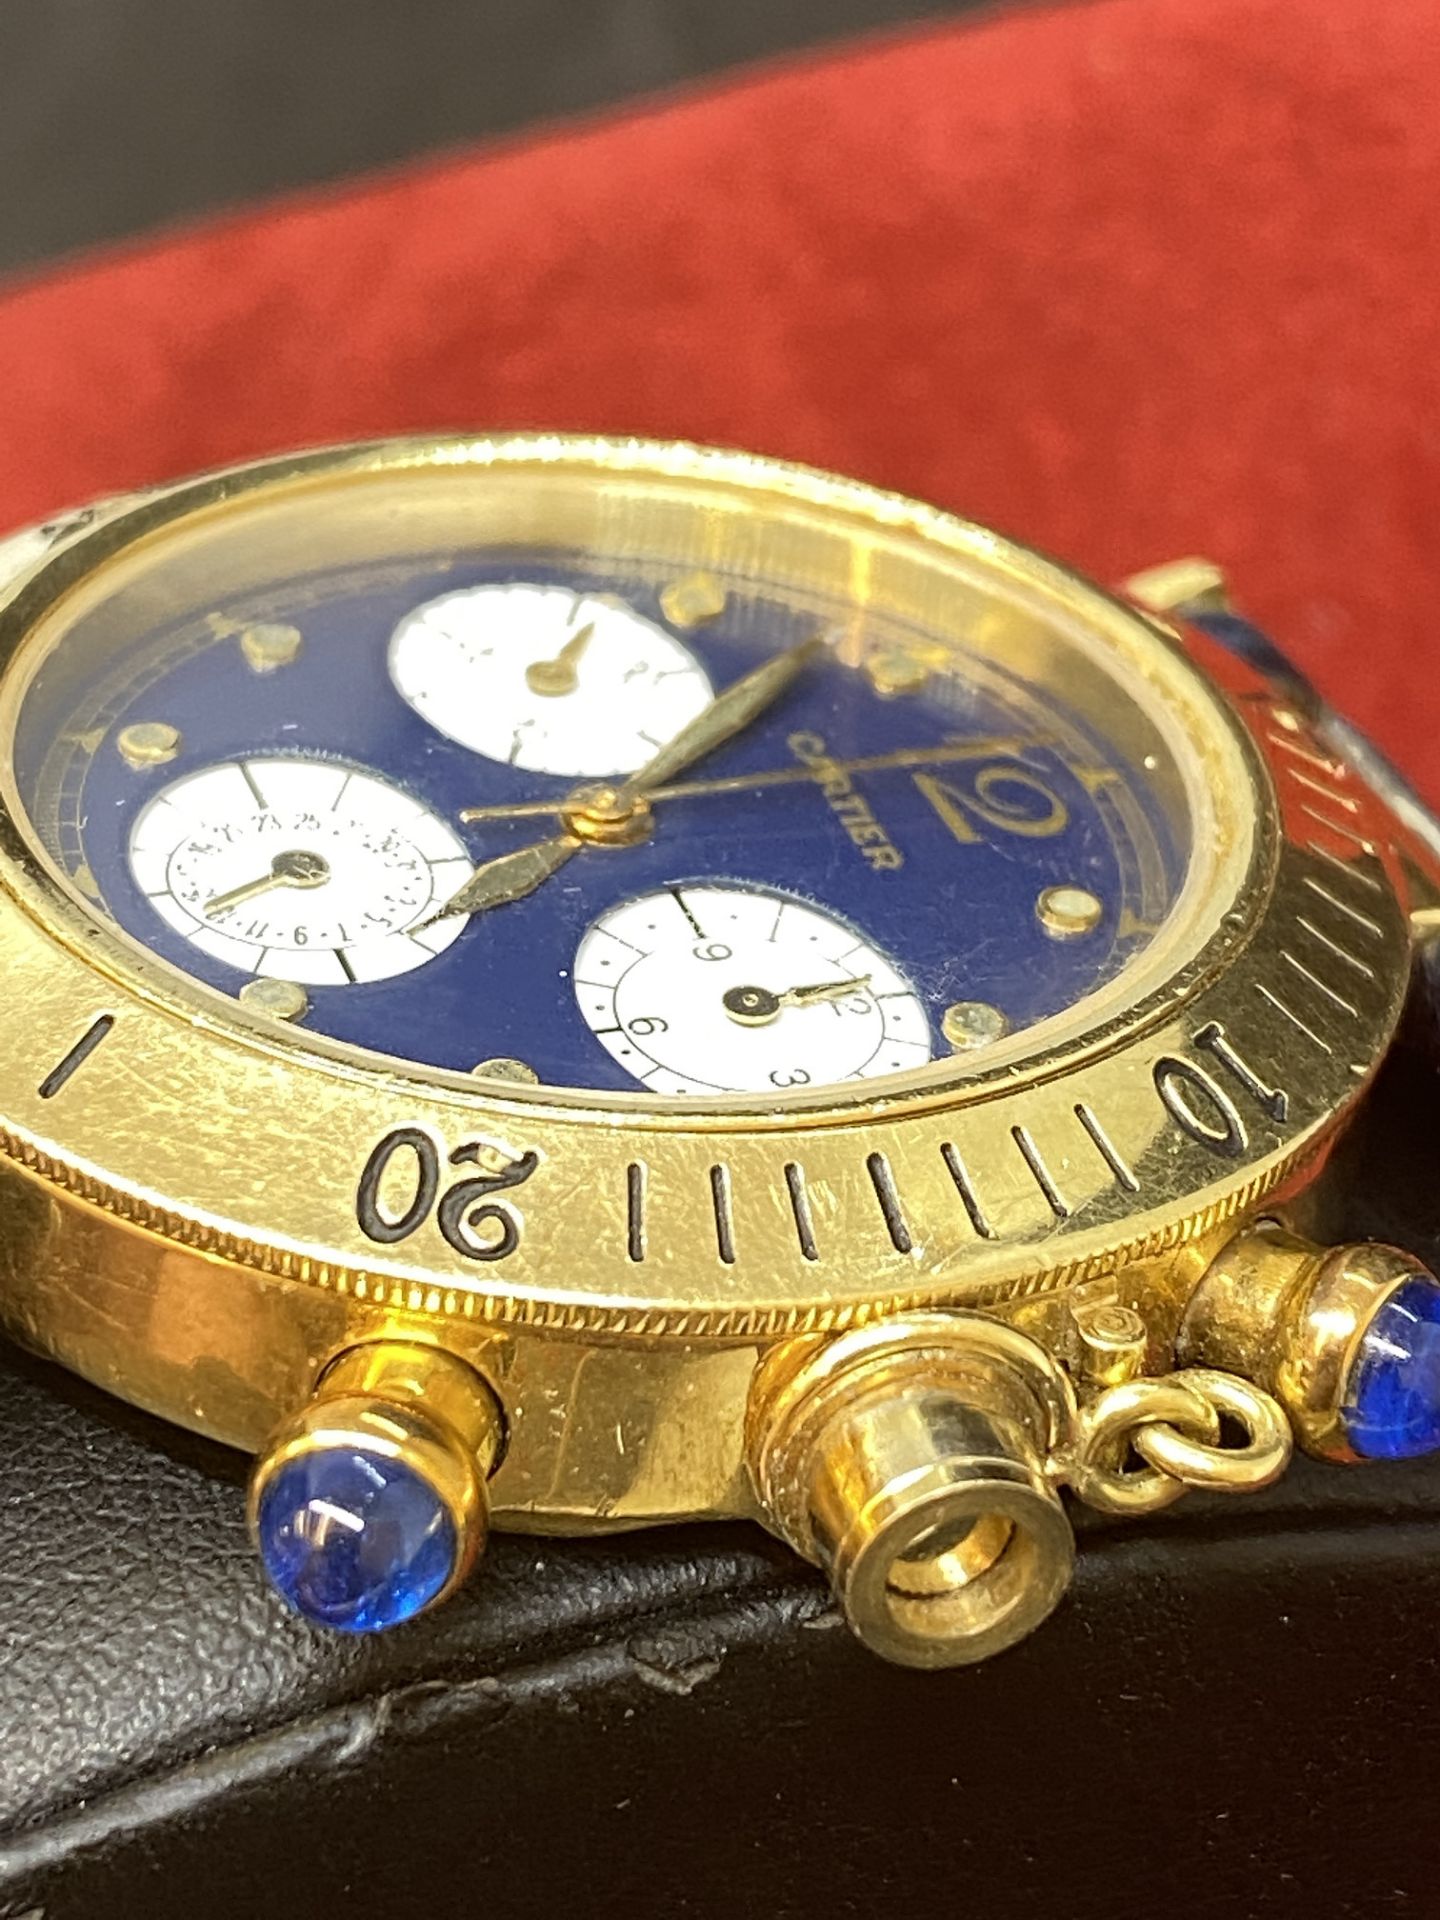 CARTIER CHRONO 18k GOLD WATCH - Image 7 of 12